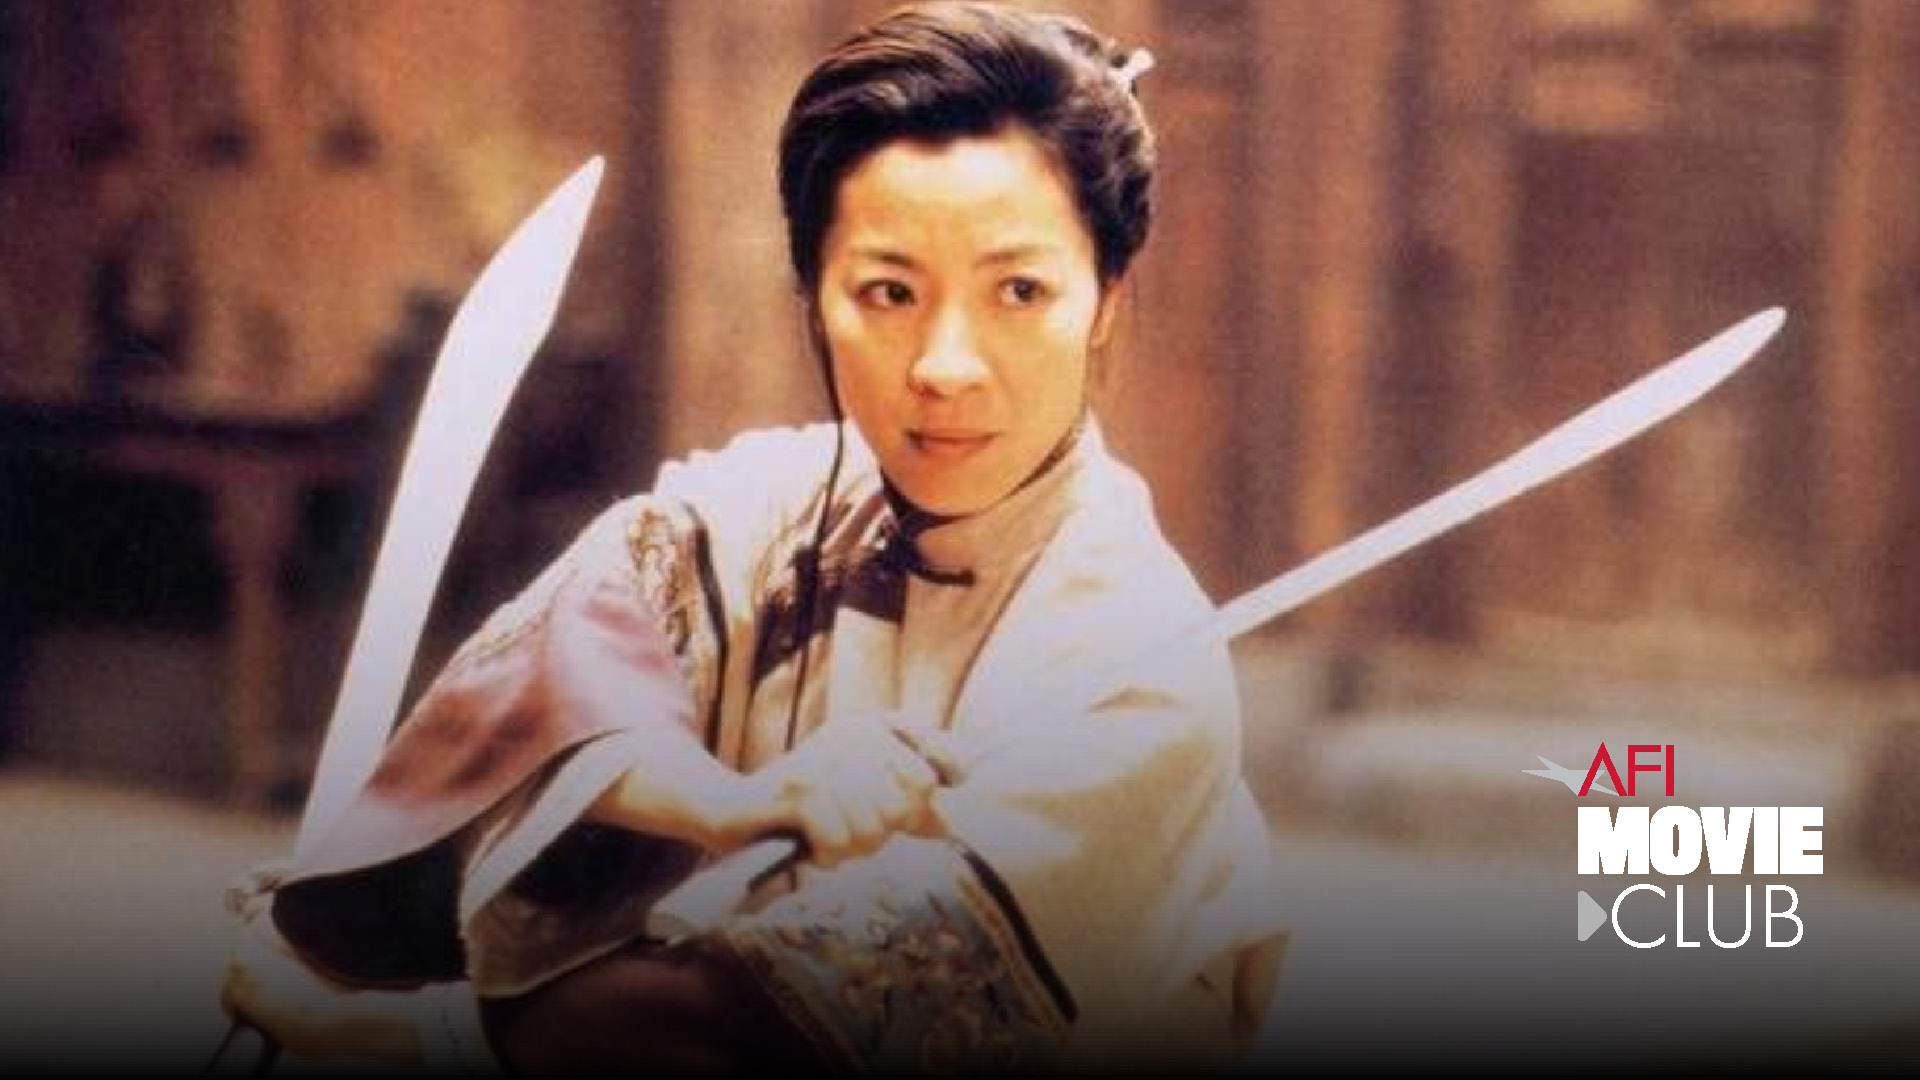 Still image featuring Michelle Yeoh from the film CROUCHING TIGER, HIDDEN DRAGON